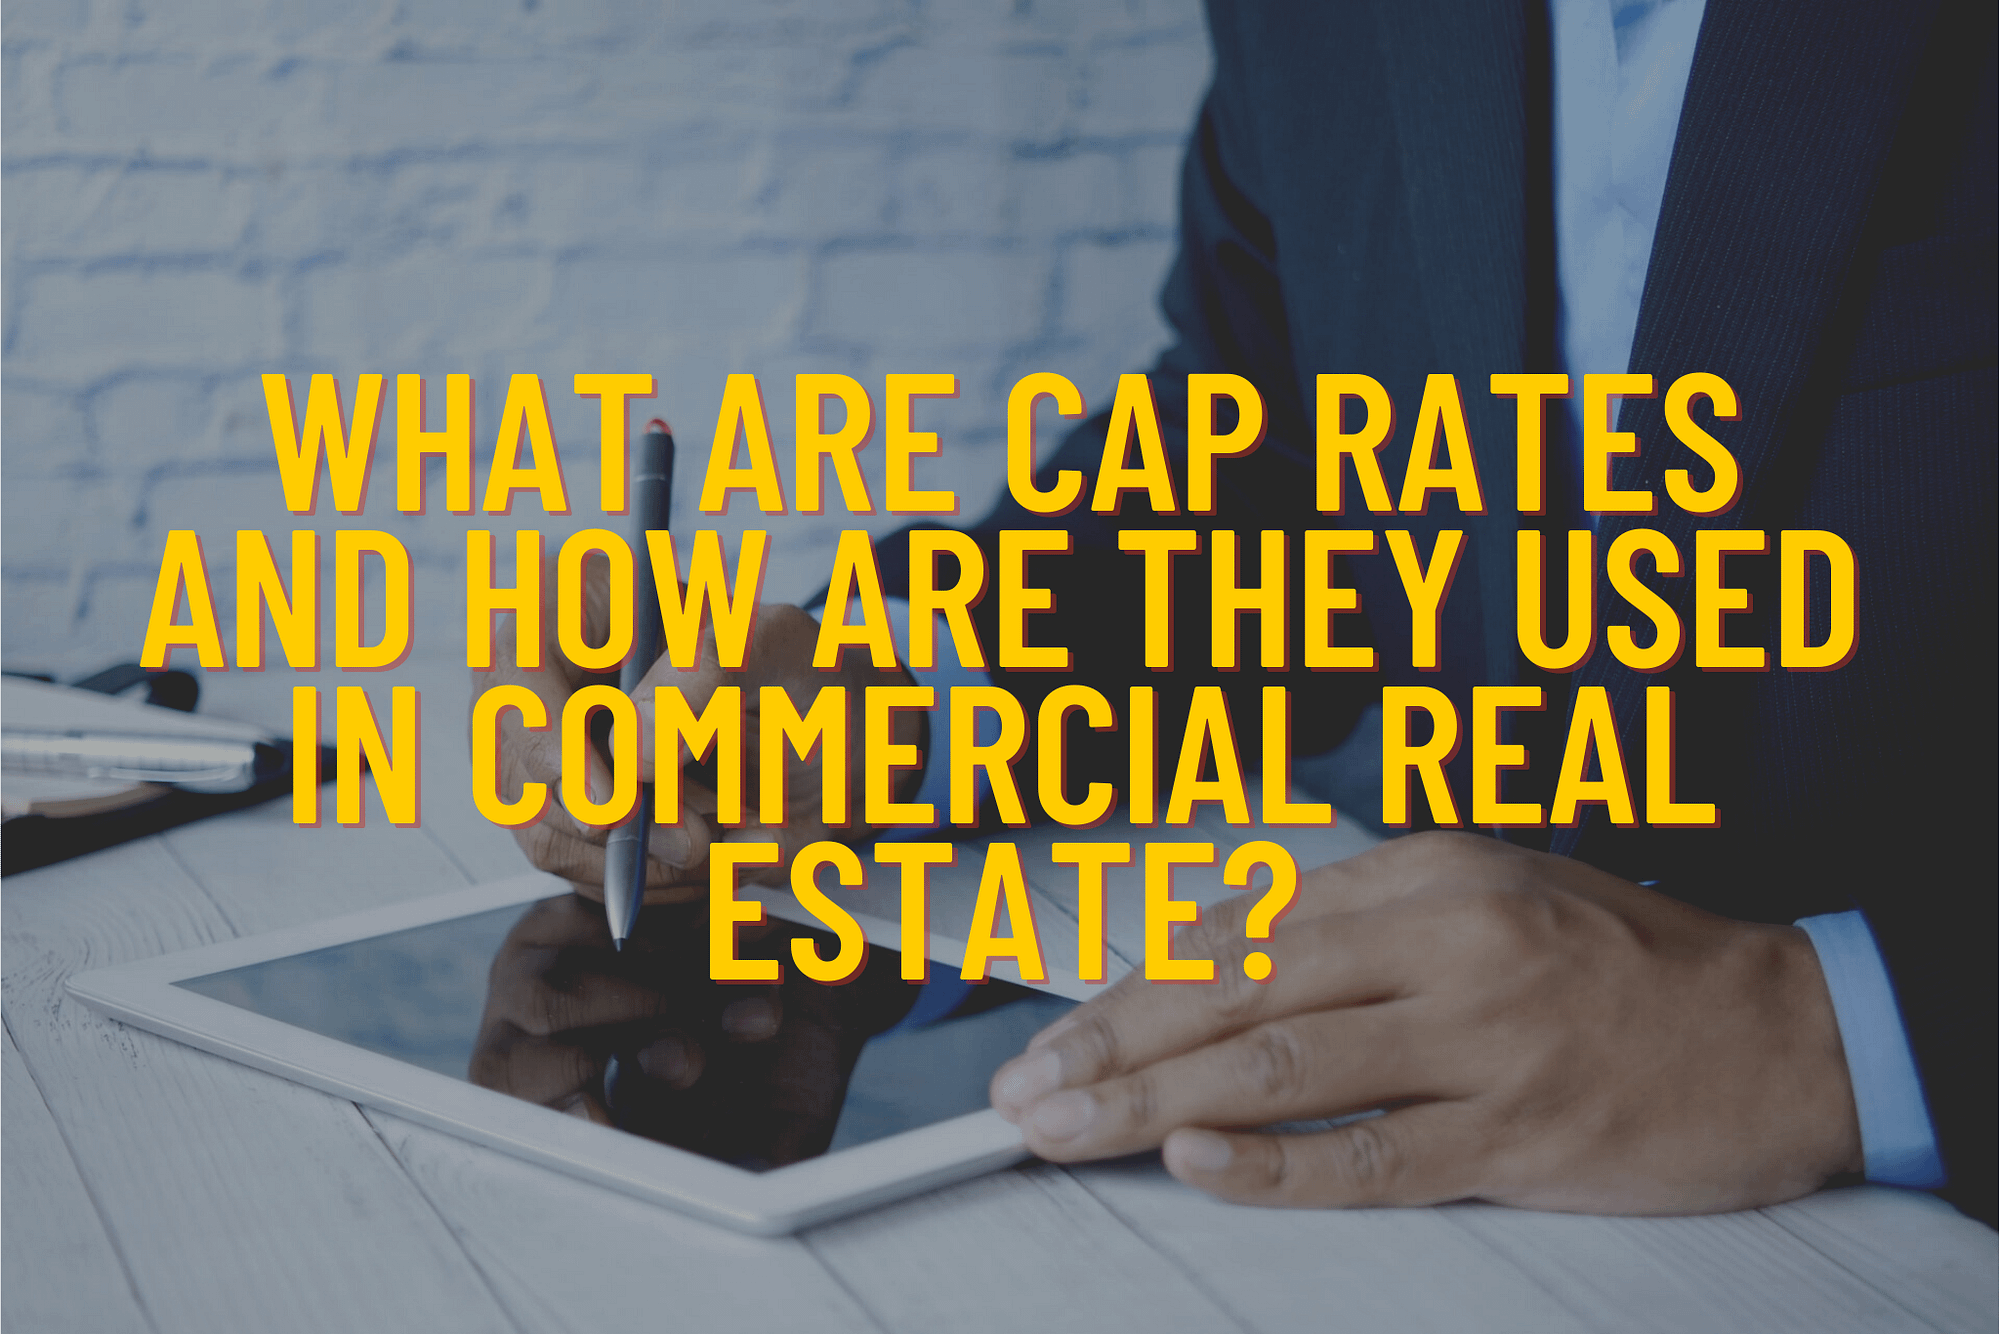 What are cap rates and how are they used in commercial real estate